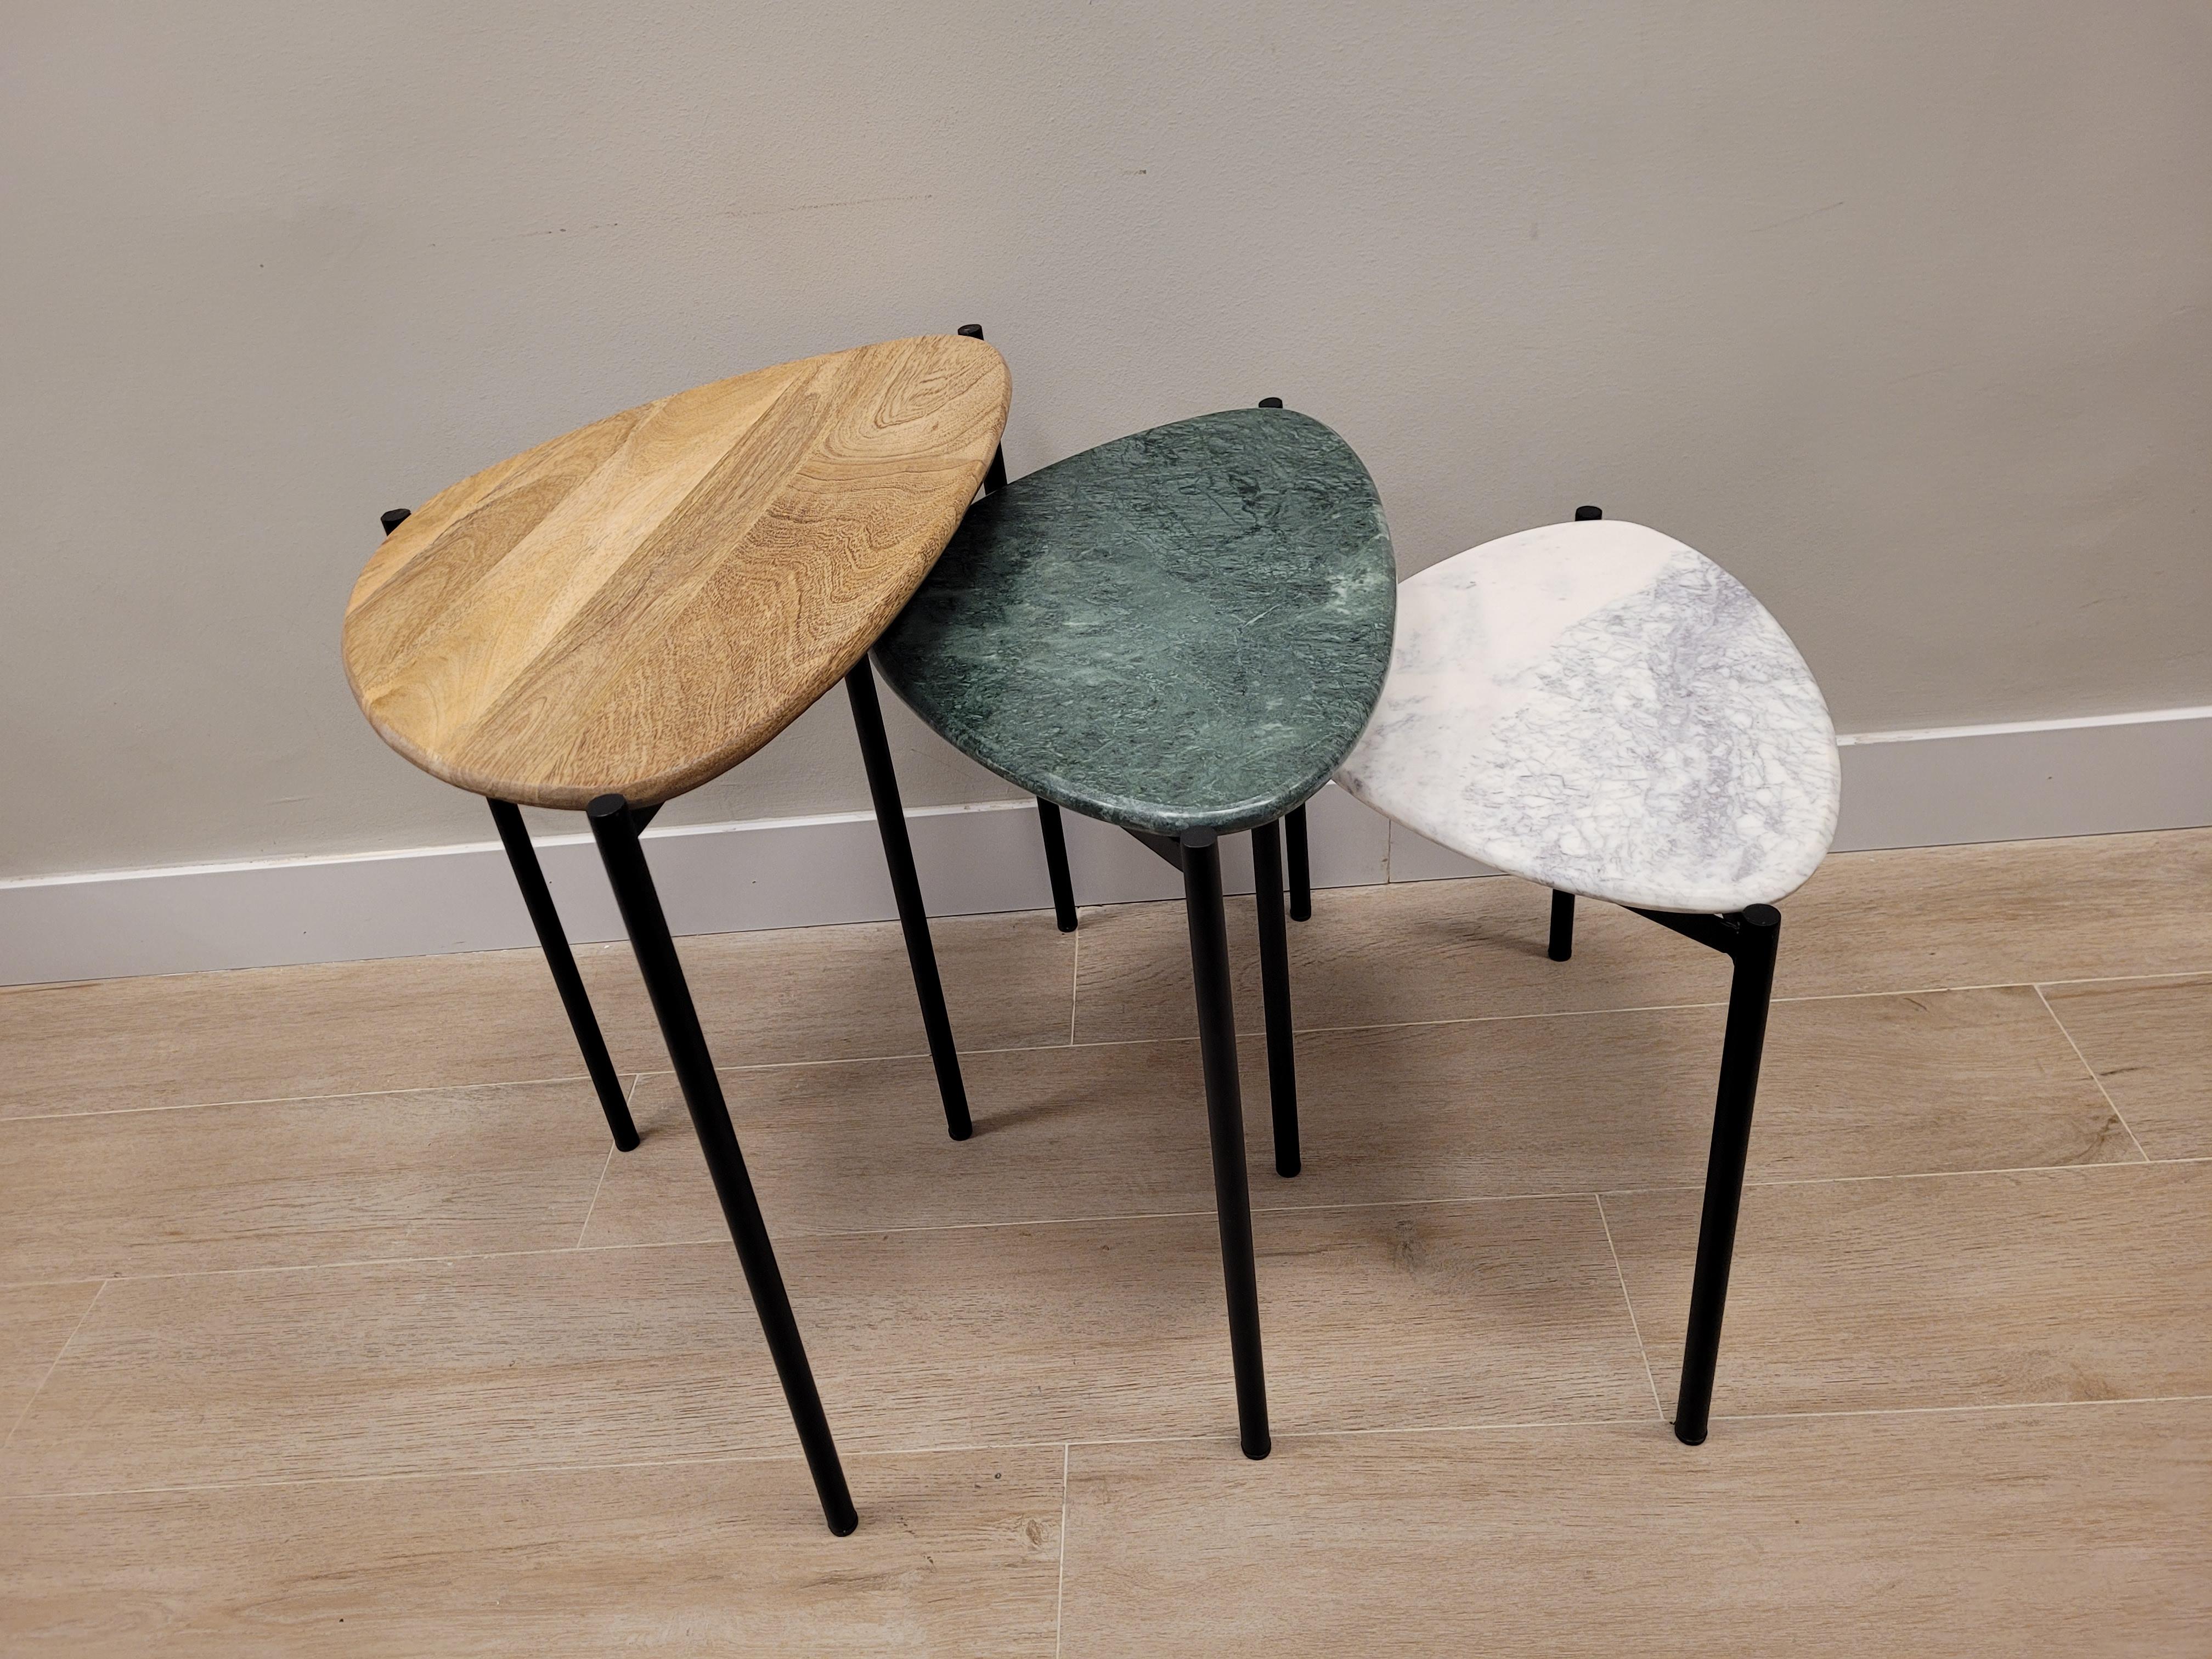 Set of 3 End-Tables Green, White Marble and Wood 21st Century, Side Table In Good Condition For Sale In Valladolid, ES